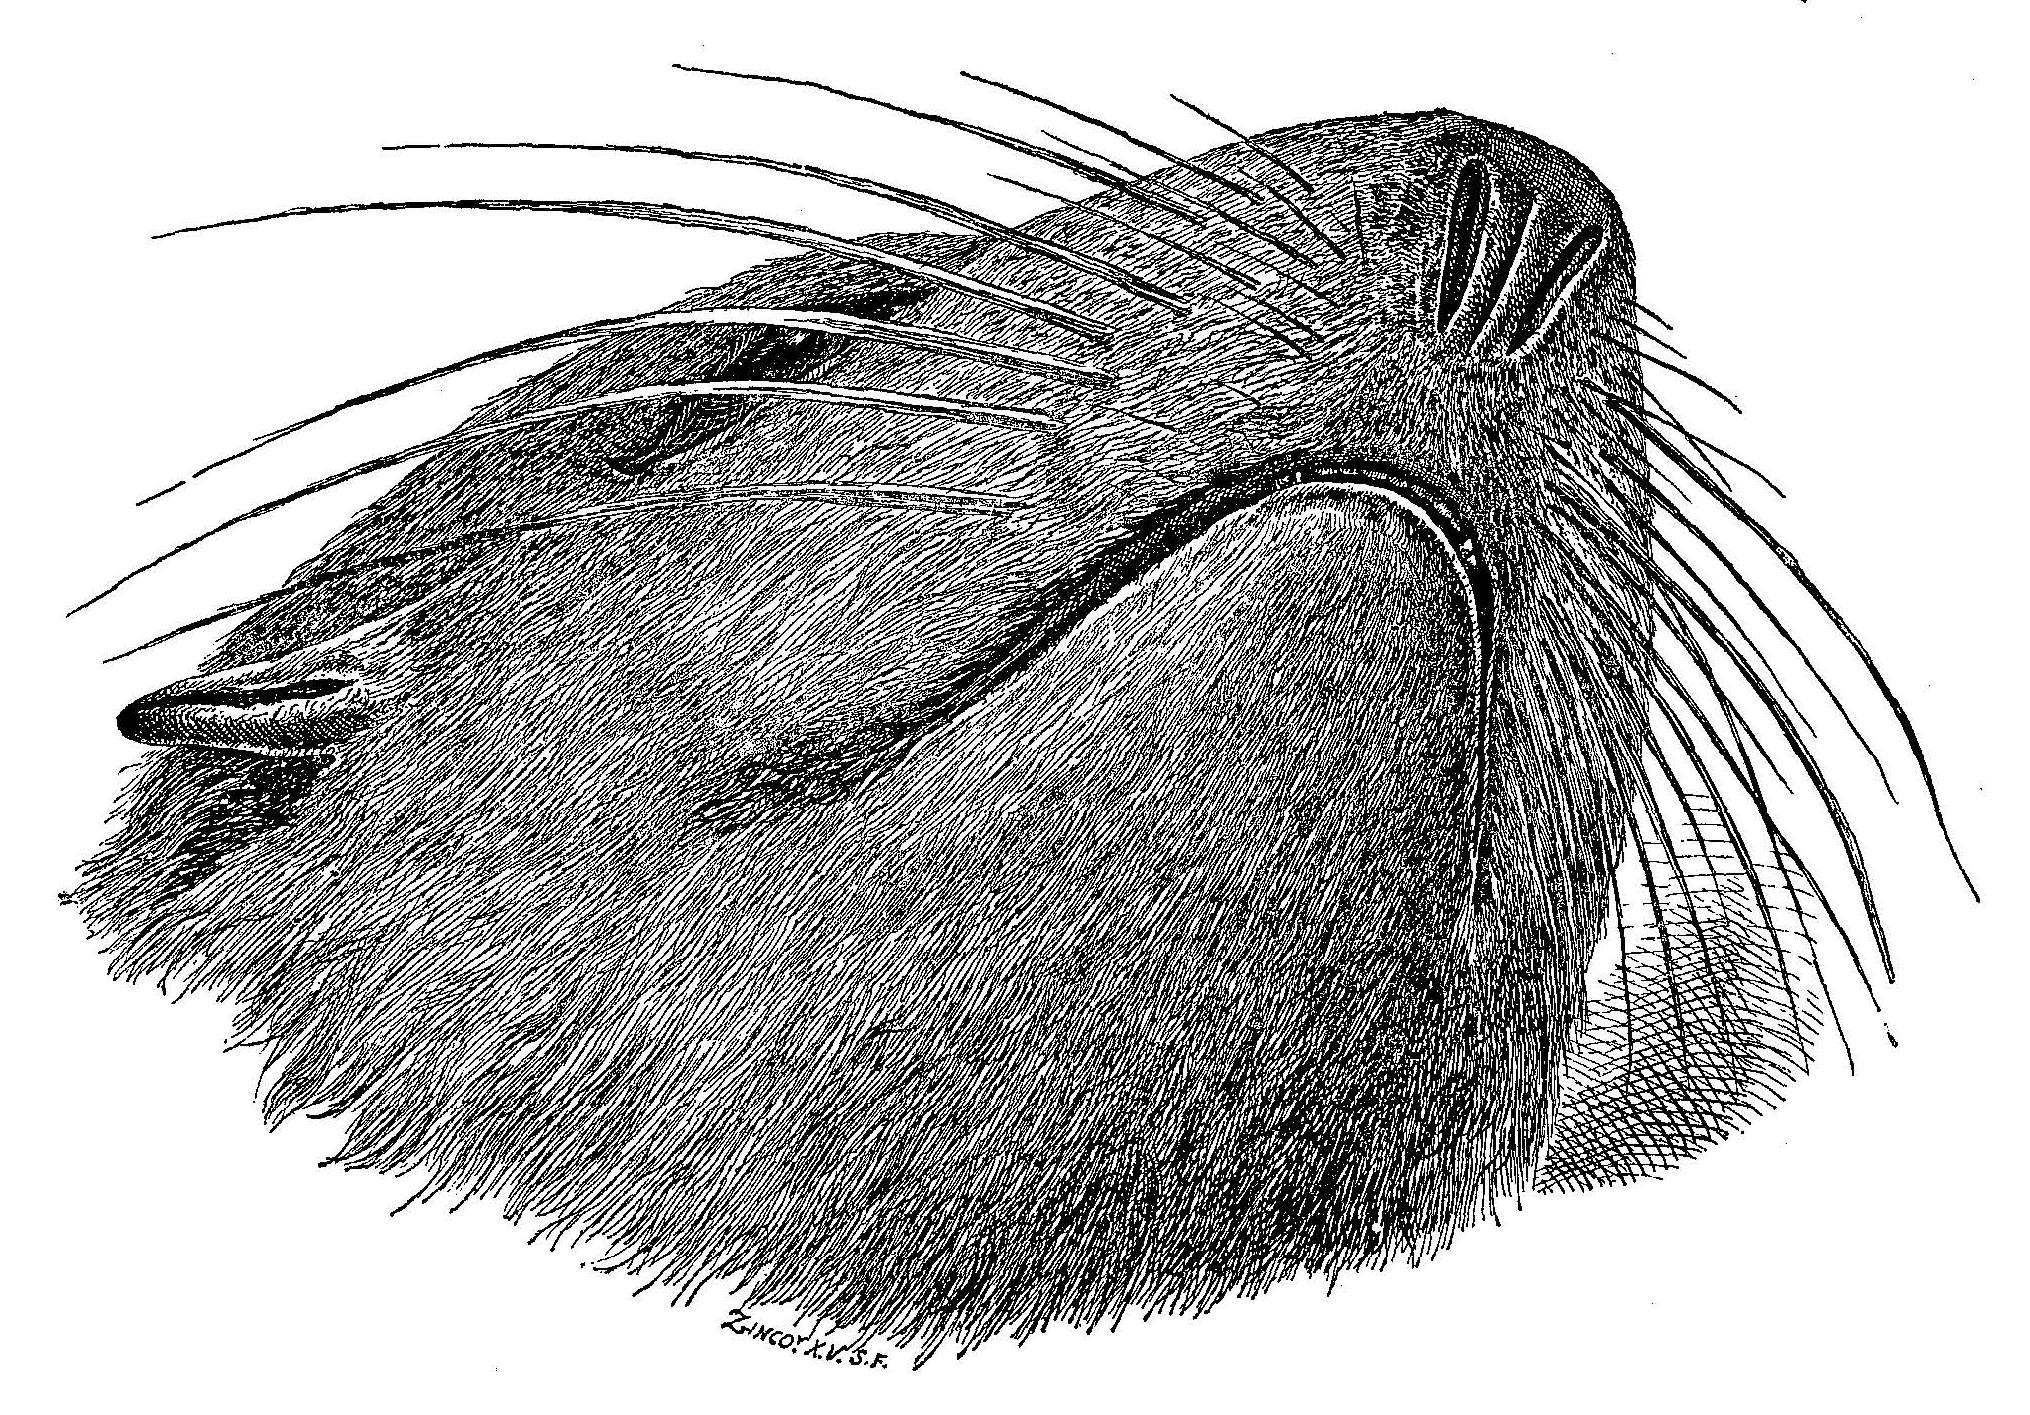 Scammon - No. 2. - Head of Female Fur Seal, Viewed from Below, Two-Thirds Natural Size. (Drawn by Elliott.)